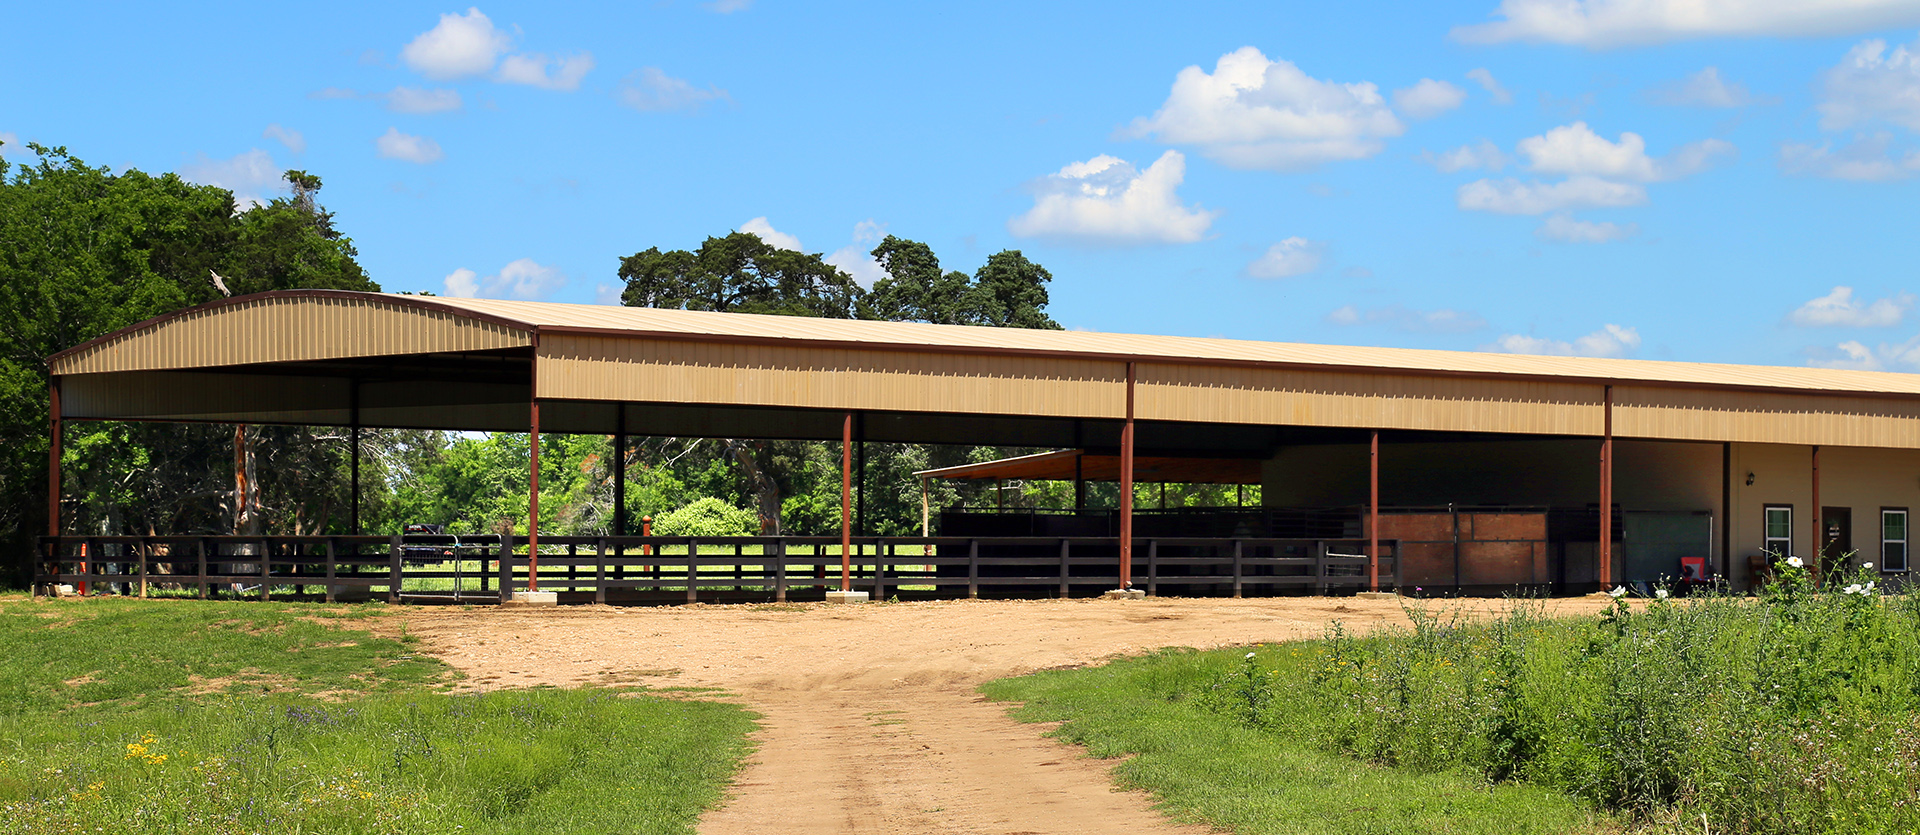 Stables at SSS Paso Fino